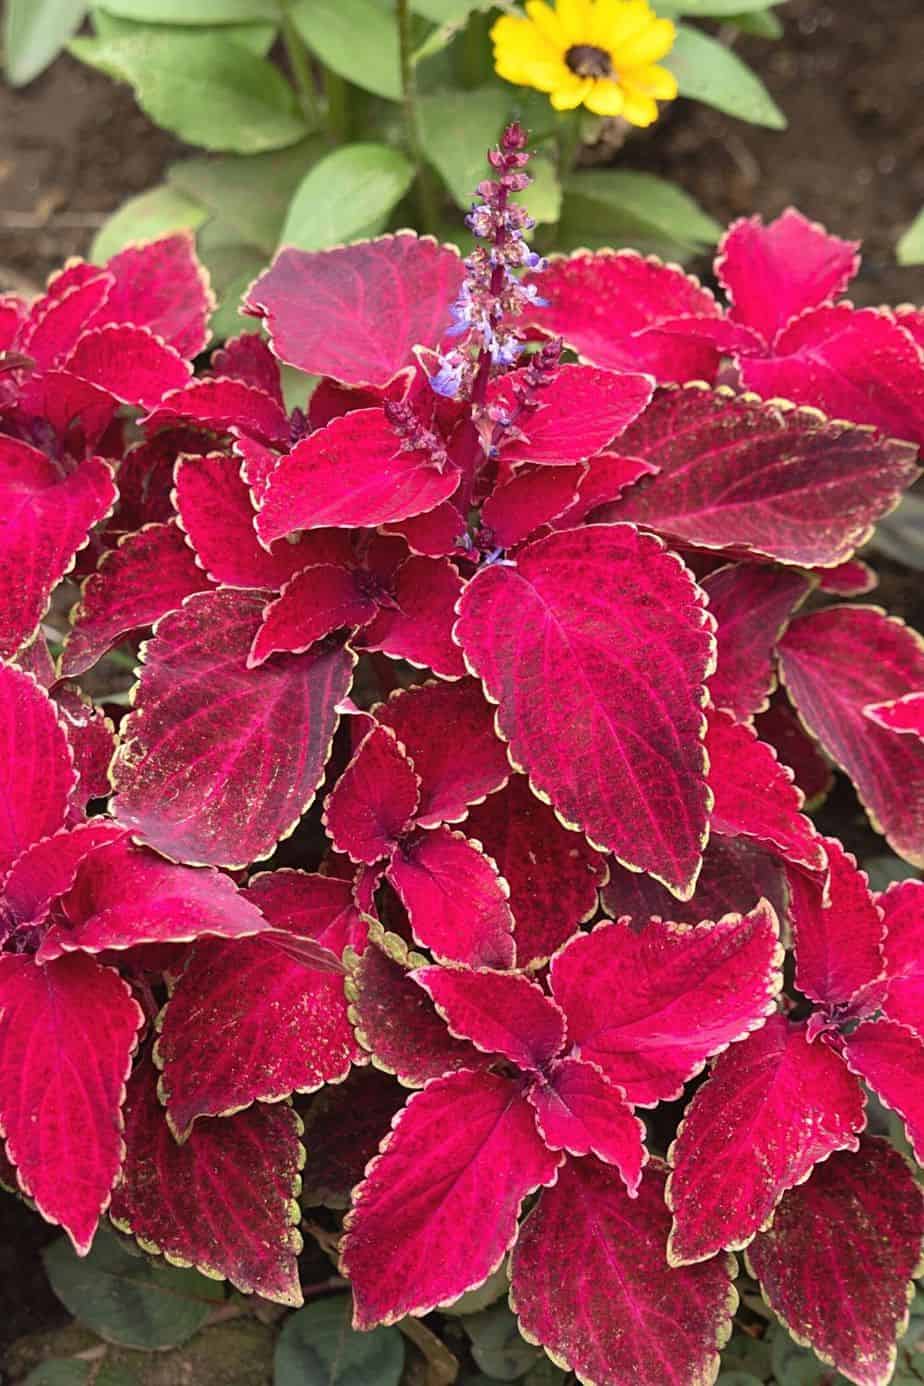 Coleus is a beautfiul plant with serrated leaves that grows well in water